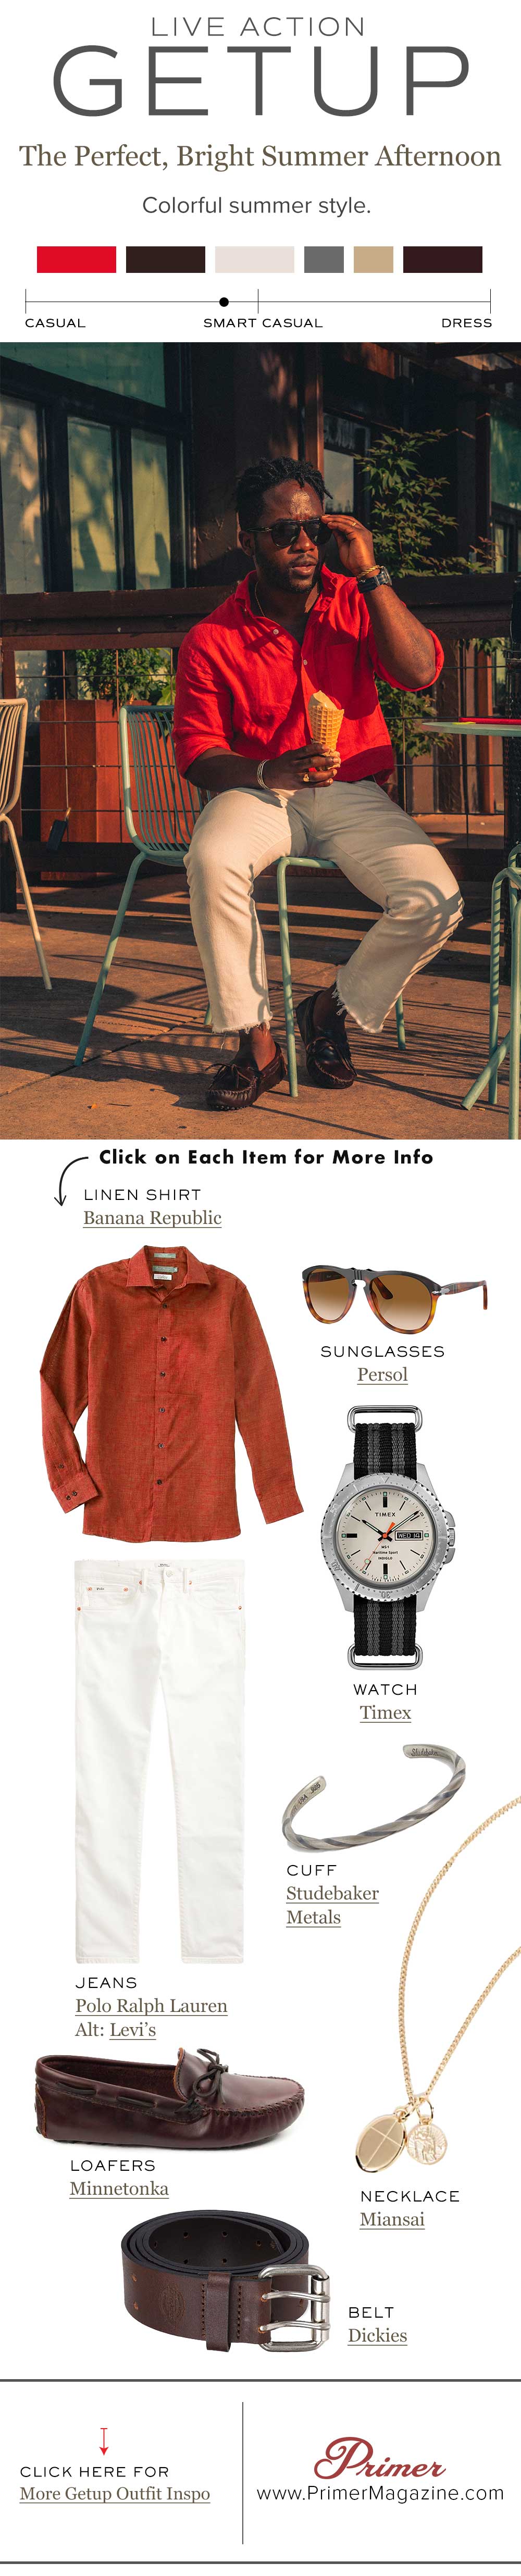 Live Action Getup: The Perfect, Bright Summer Afternoon men's outfit idea infographic